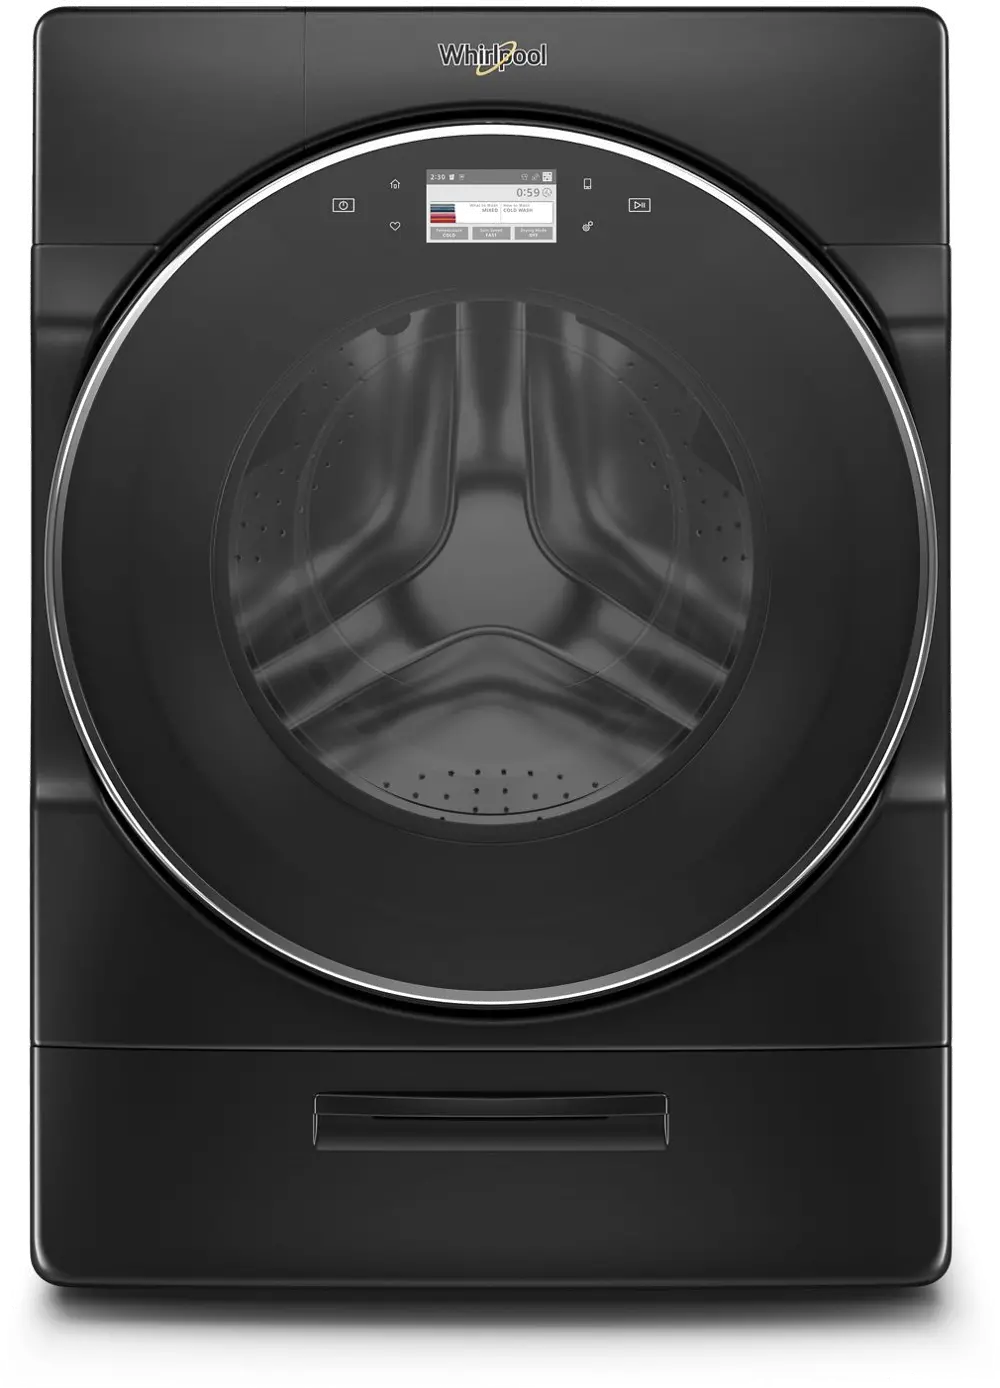 WFW9620HBK Whirlpool Smart Front Load Washer with XL Plus Dispenser - 5.0 cu. ft. Black-1